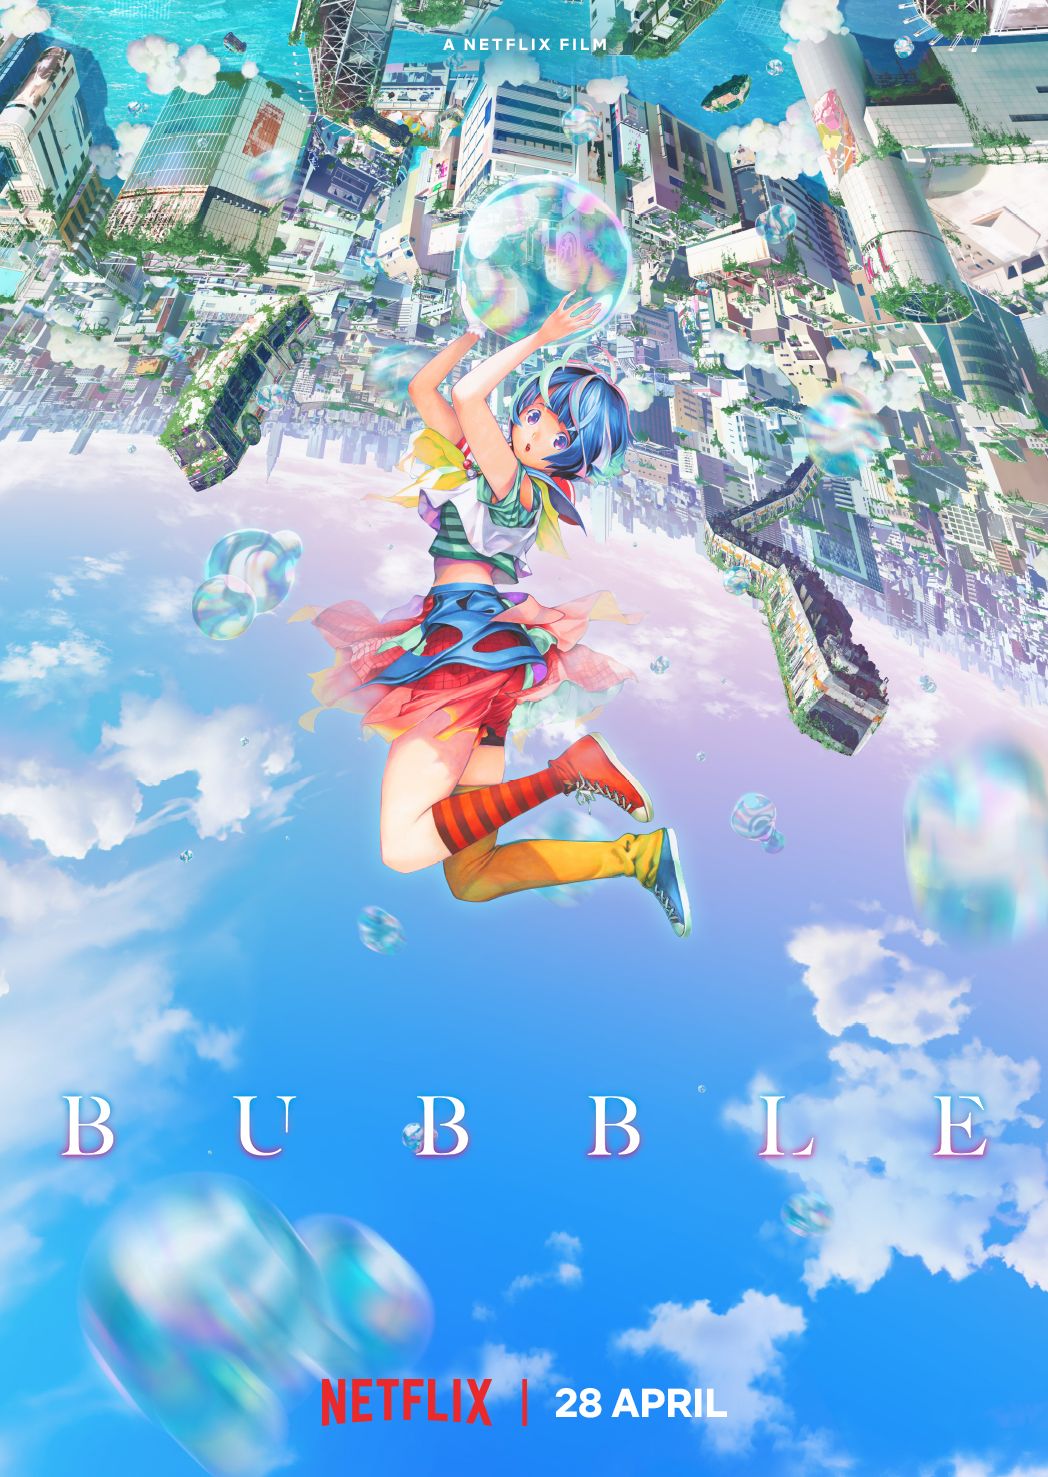 Bubble Trailer Reveals an Anime World with GravityAltering Bubbles